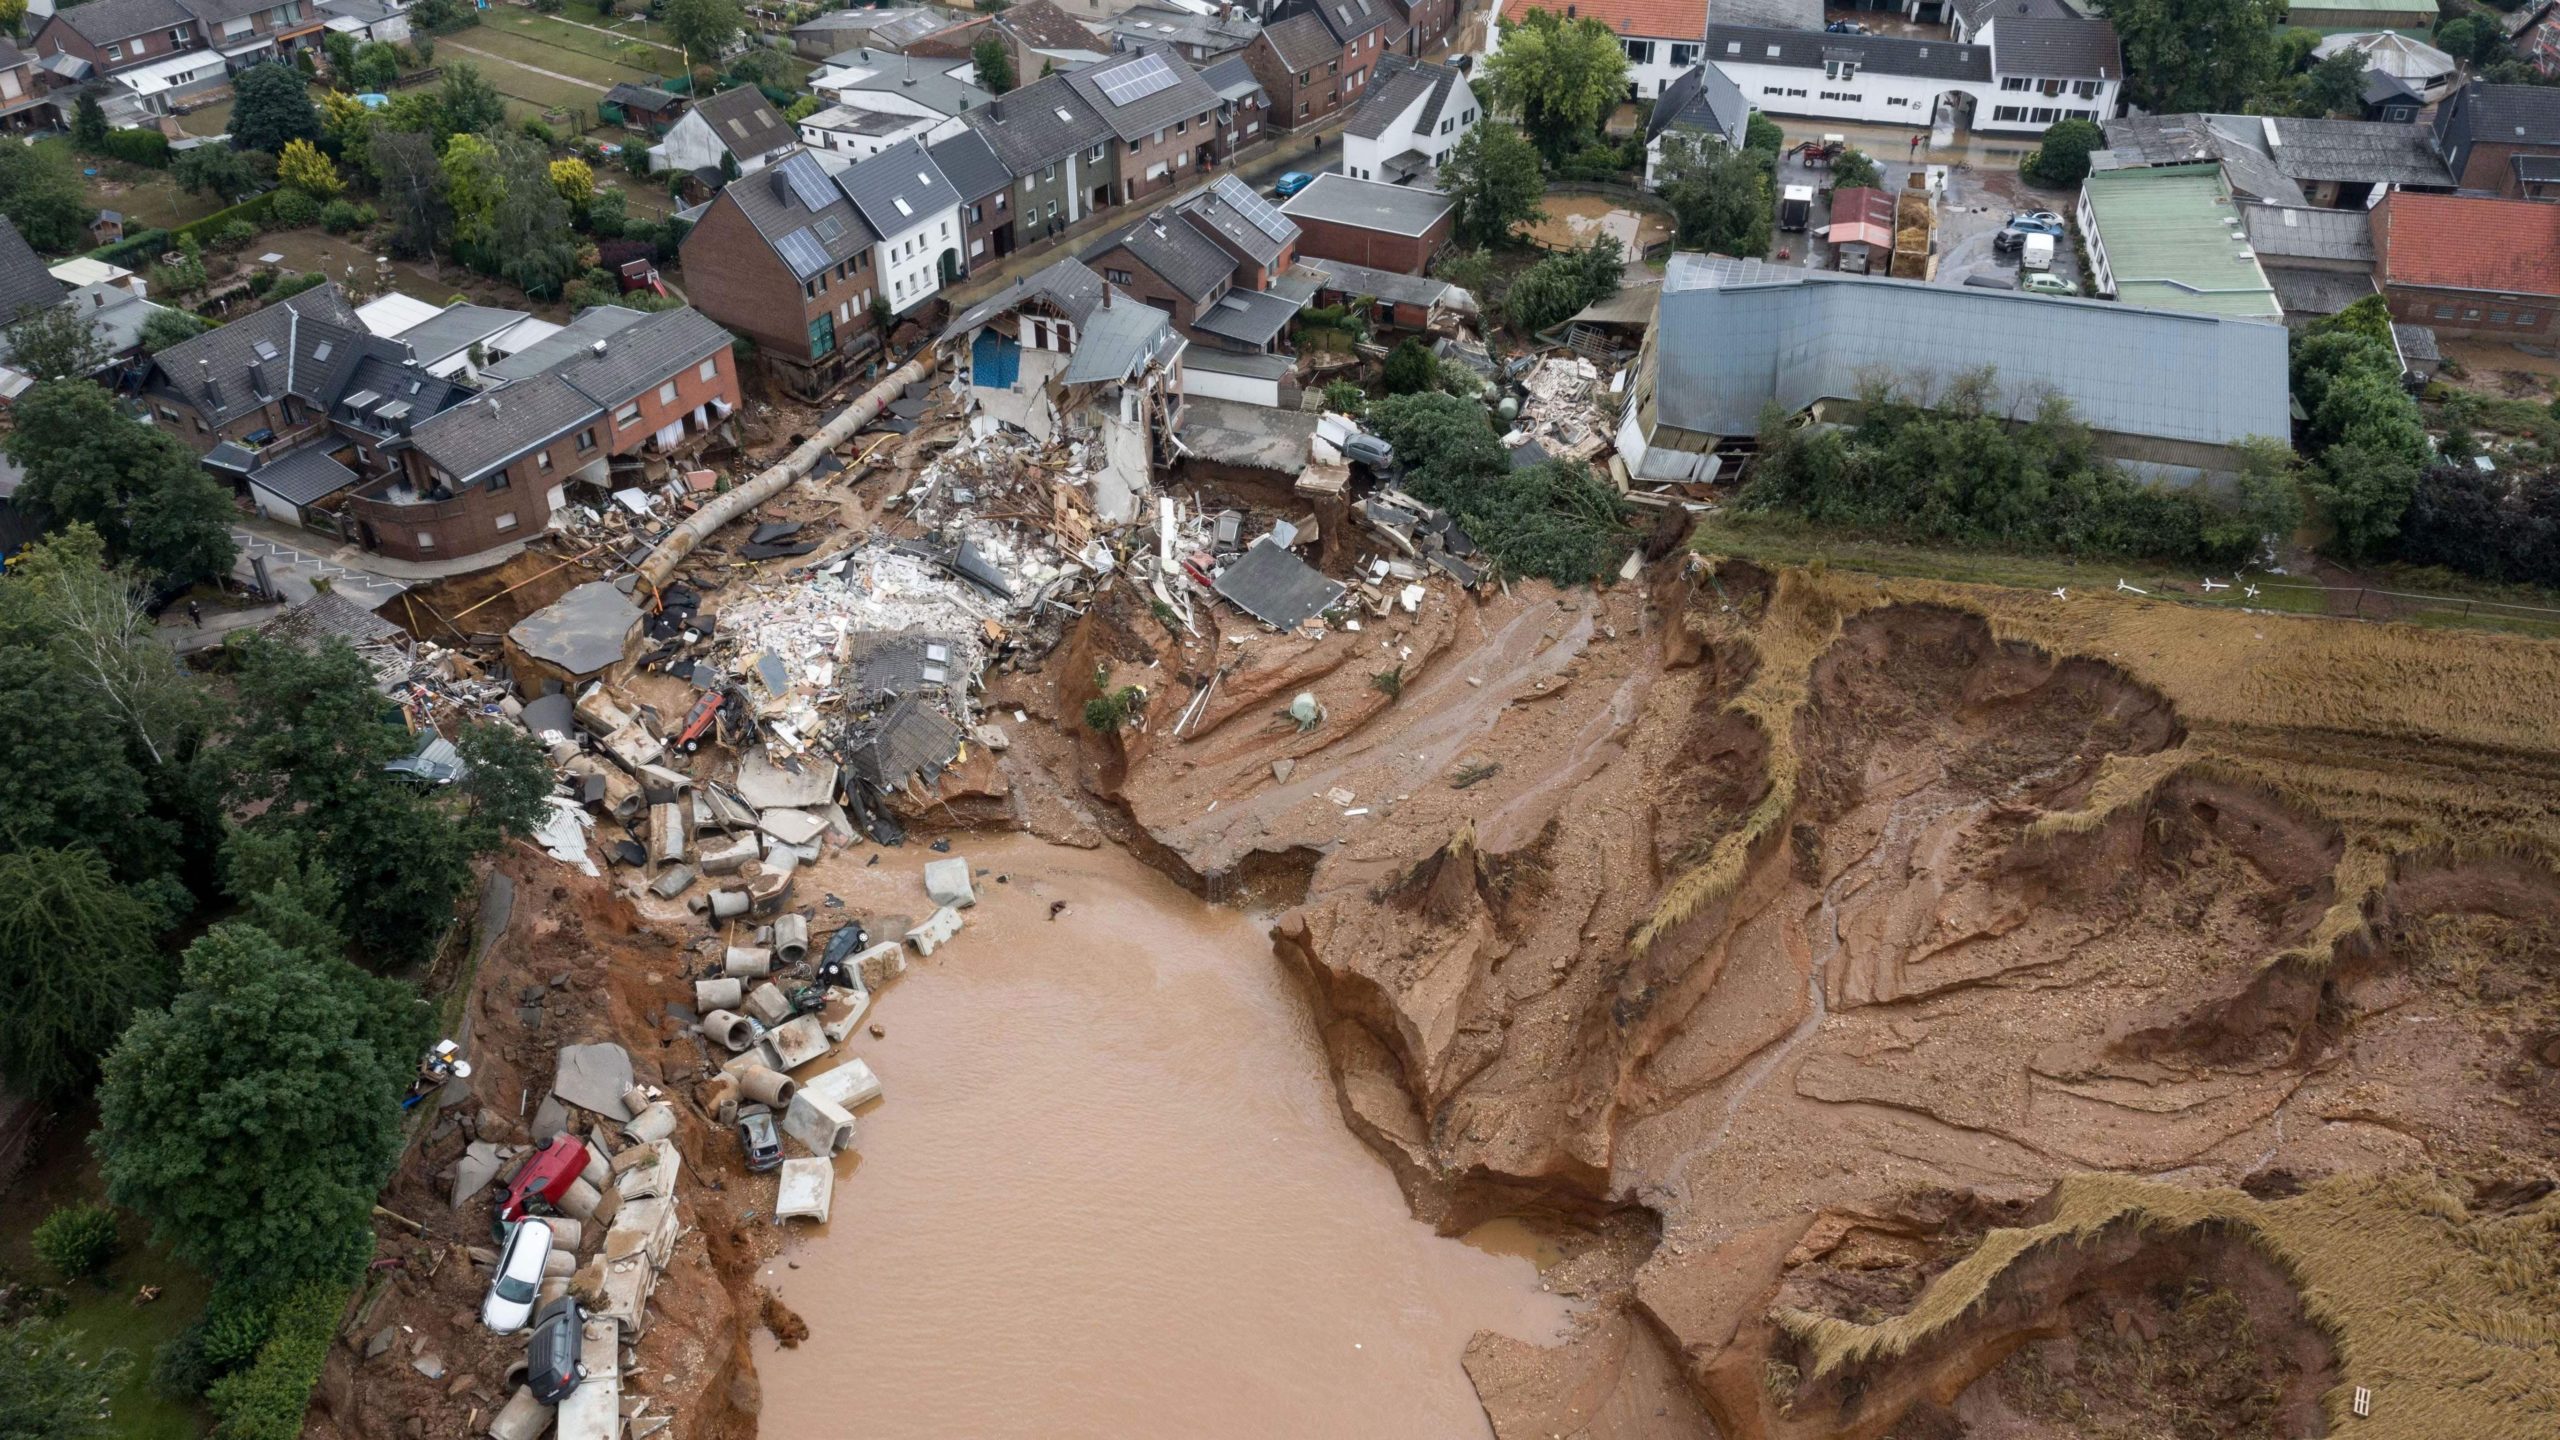 Aerial view shows an area completely destroyed by the floods in the Blessem district of Erftstadt, western Germany, on July 16. (Photo: Sebastien Bozon/AFP, Getty Images)